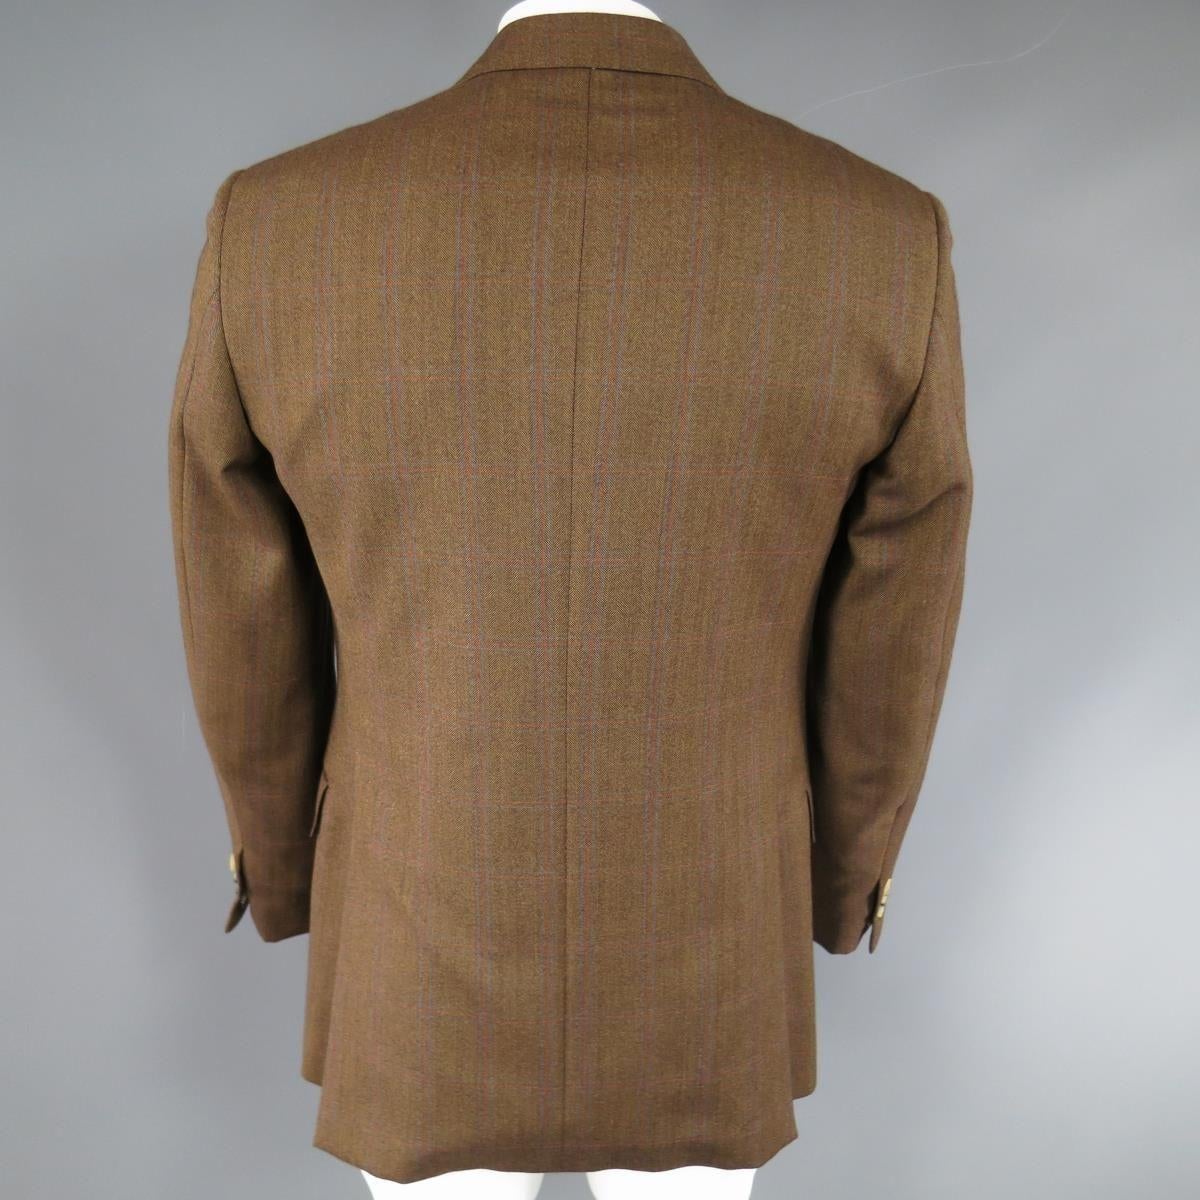 Classic PAL ZILERI two button sport coat in a light brown harringbone textured wool with all over blue and red windowpane print. Detailed with a top stitch peak lapel, flap pockets, functional button cuffs, and double vented back. Made in